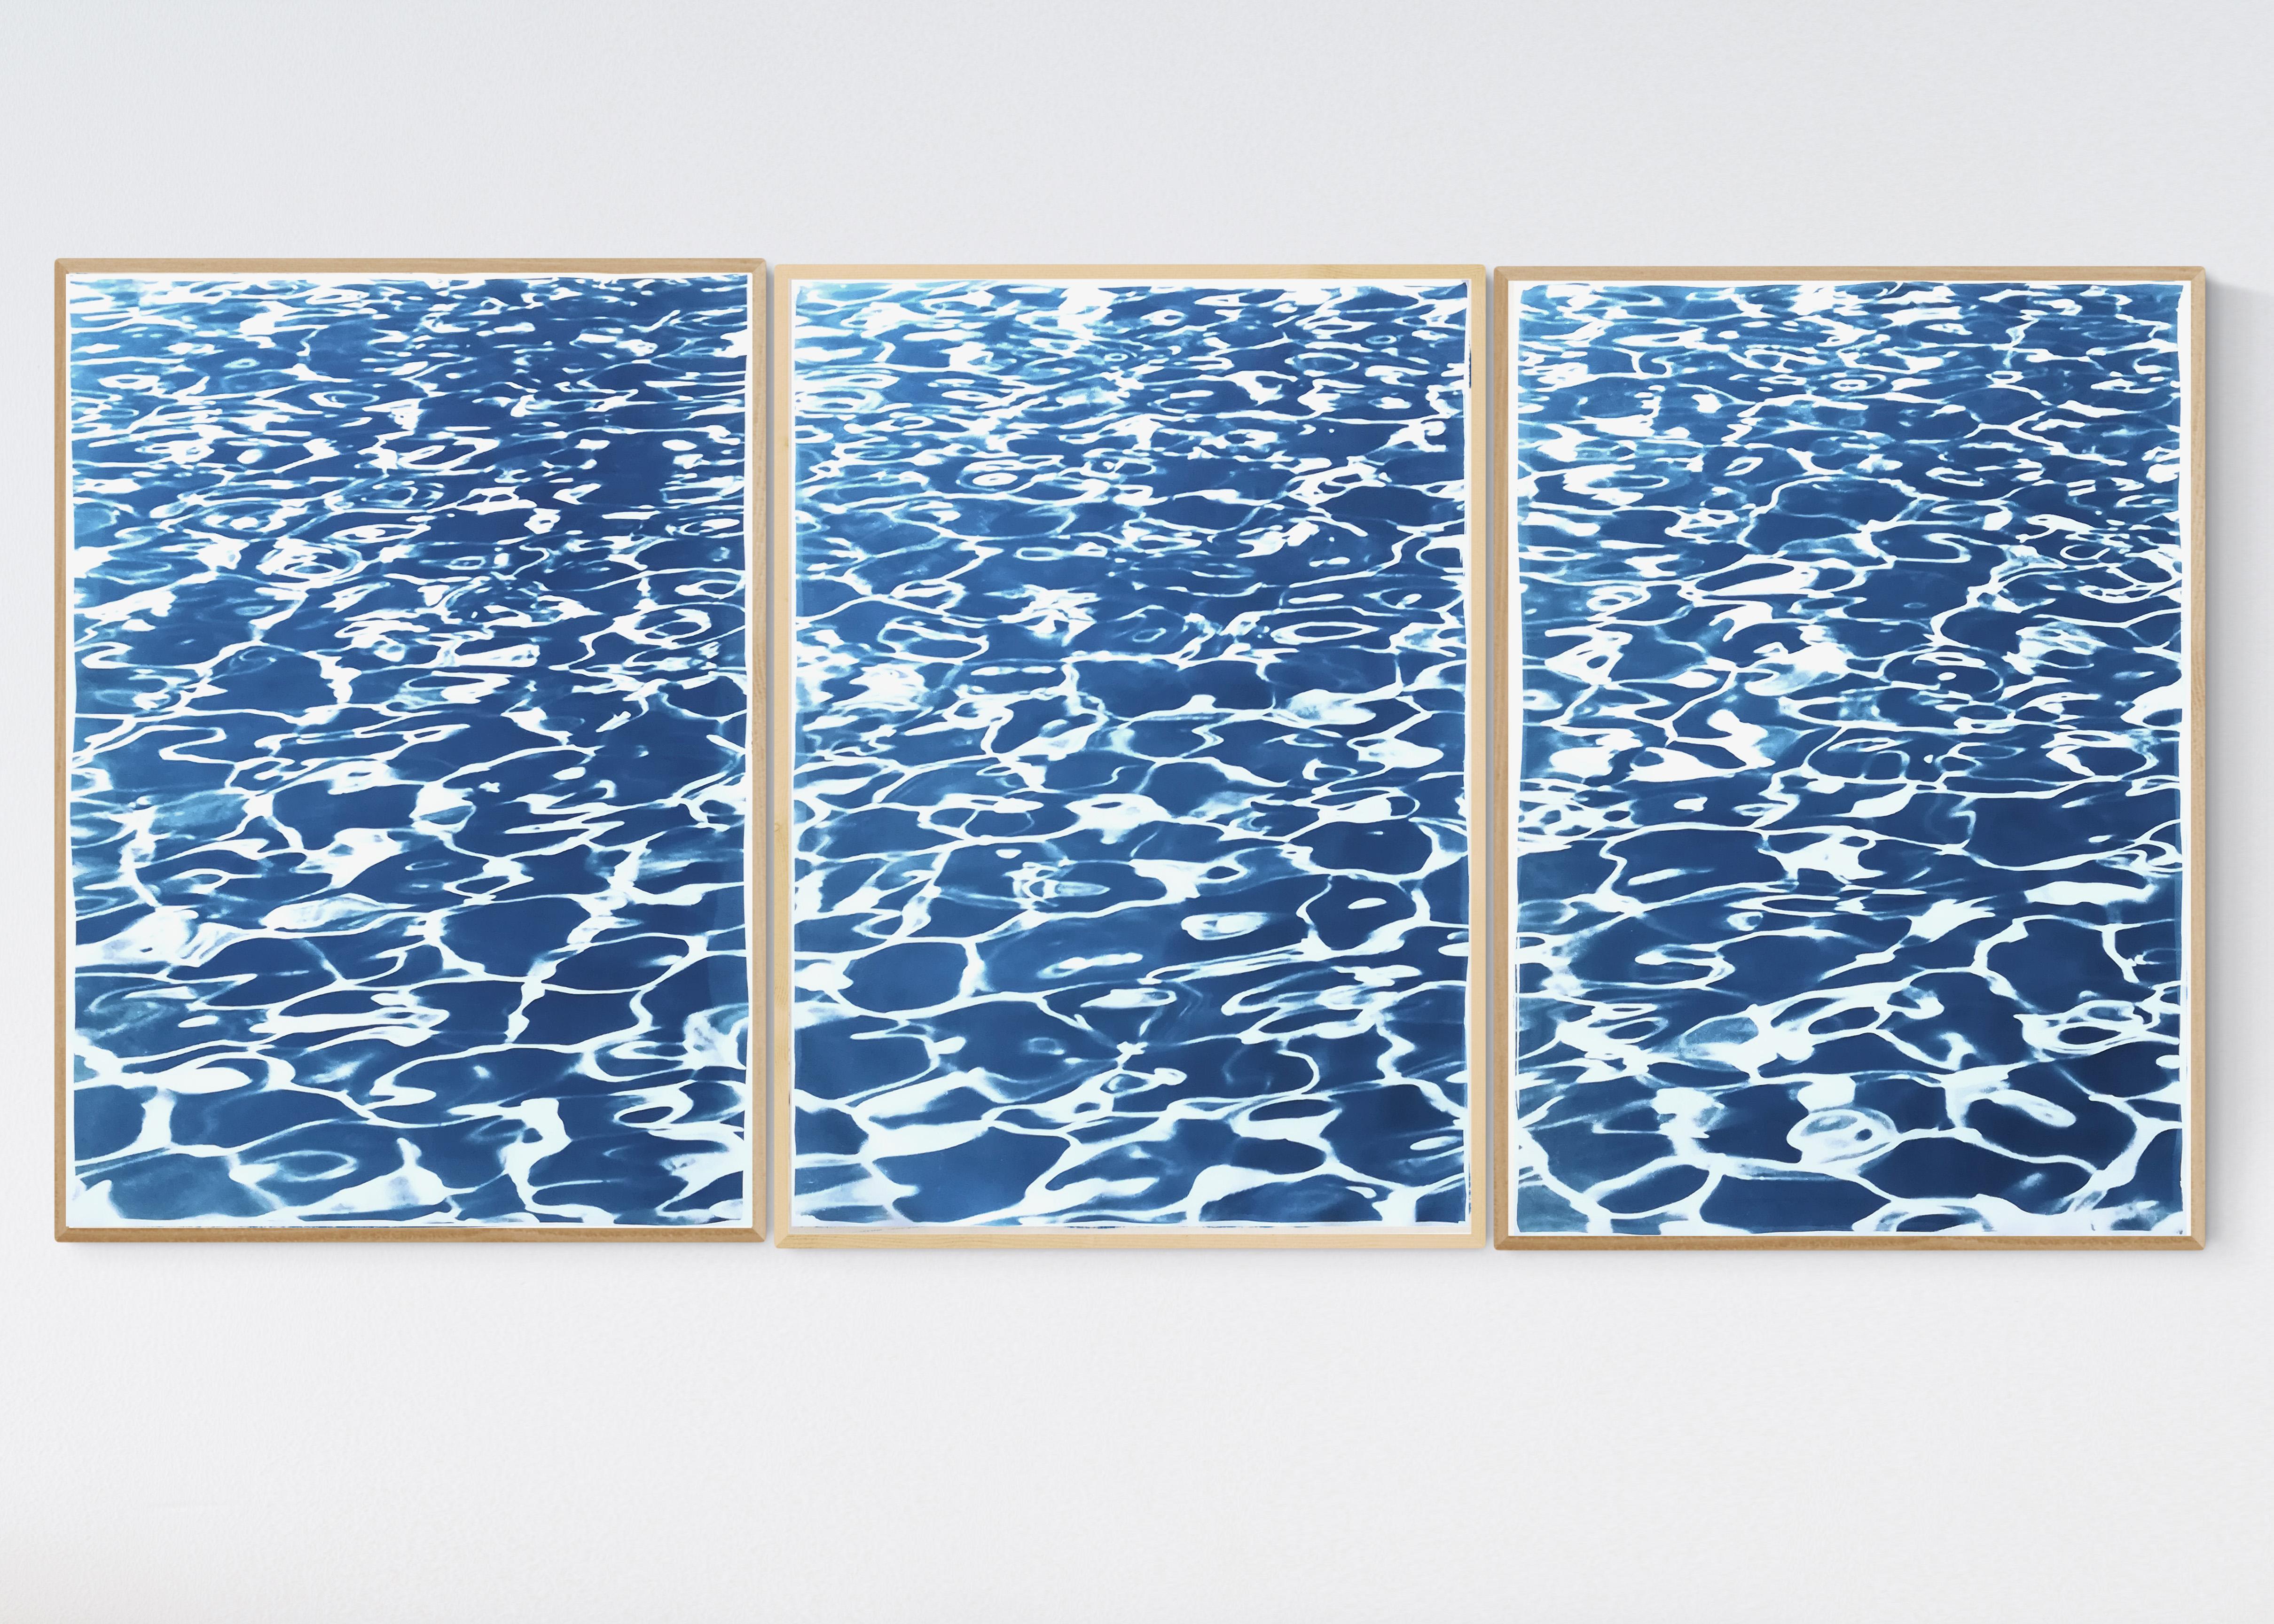 Pool Patterns, Nautical Abstract Seascape Triptych, Blue Cyanotype Print 3